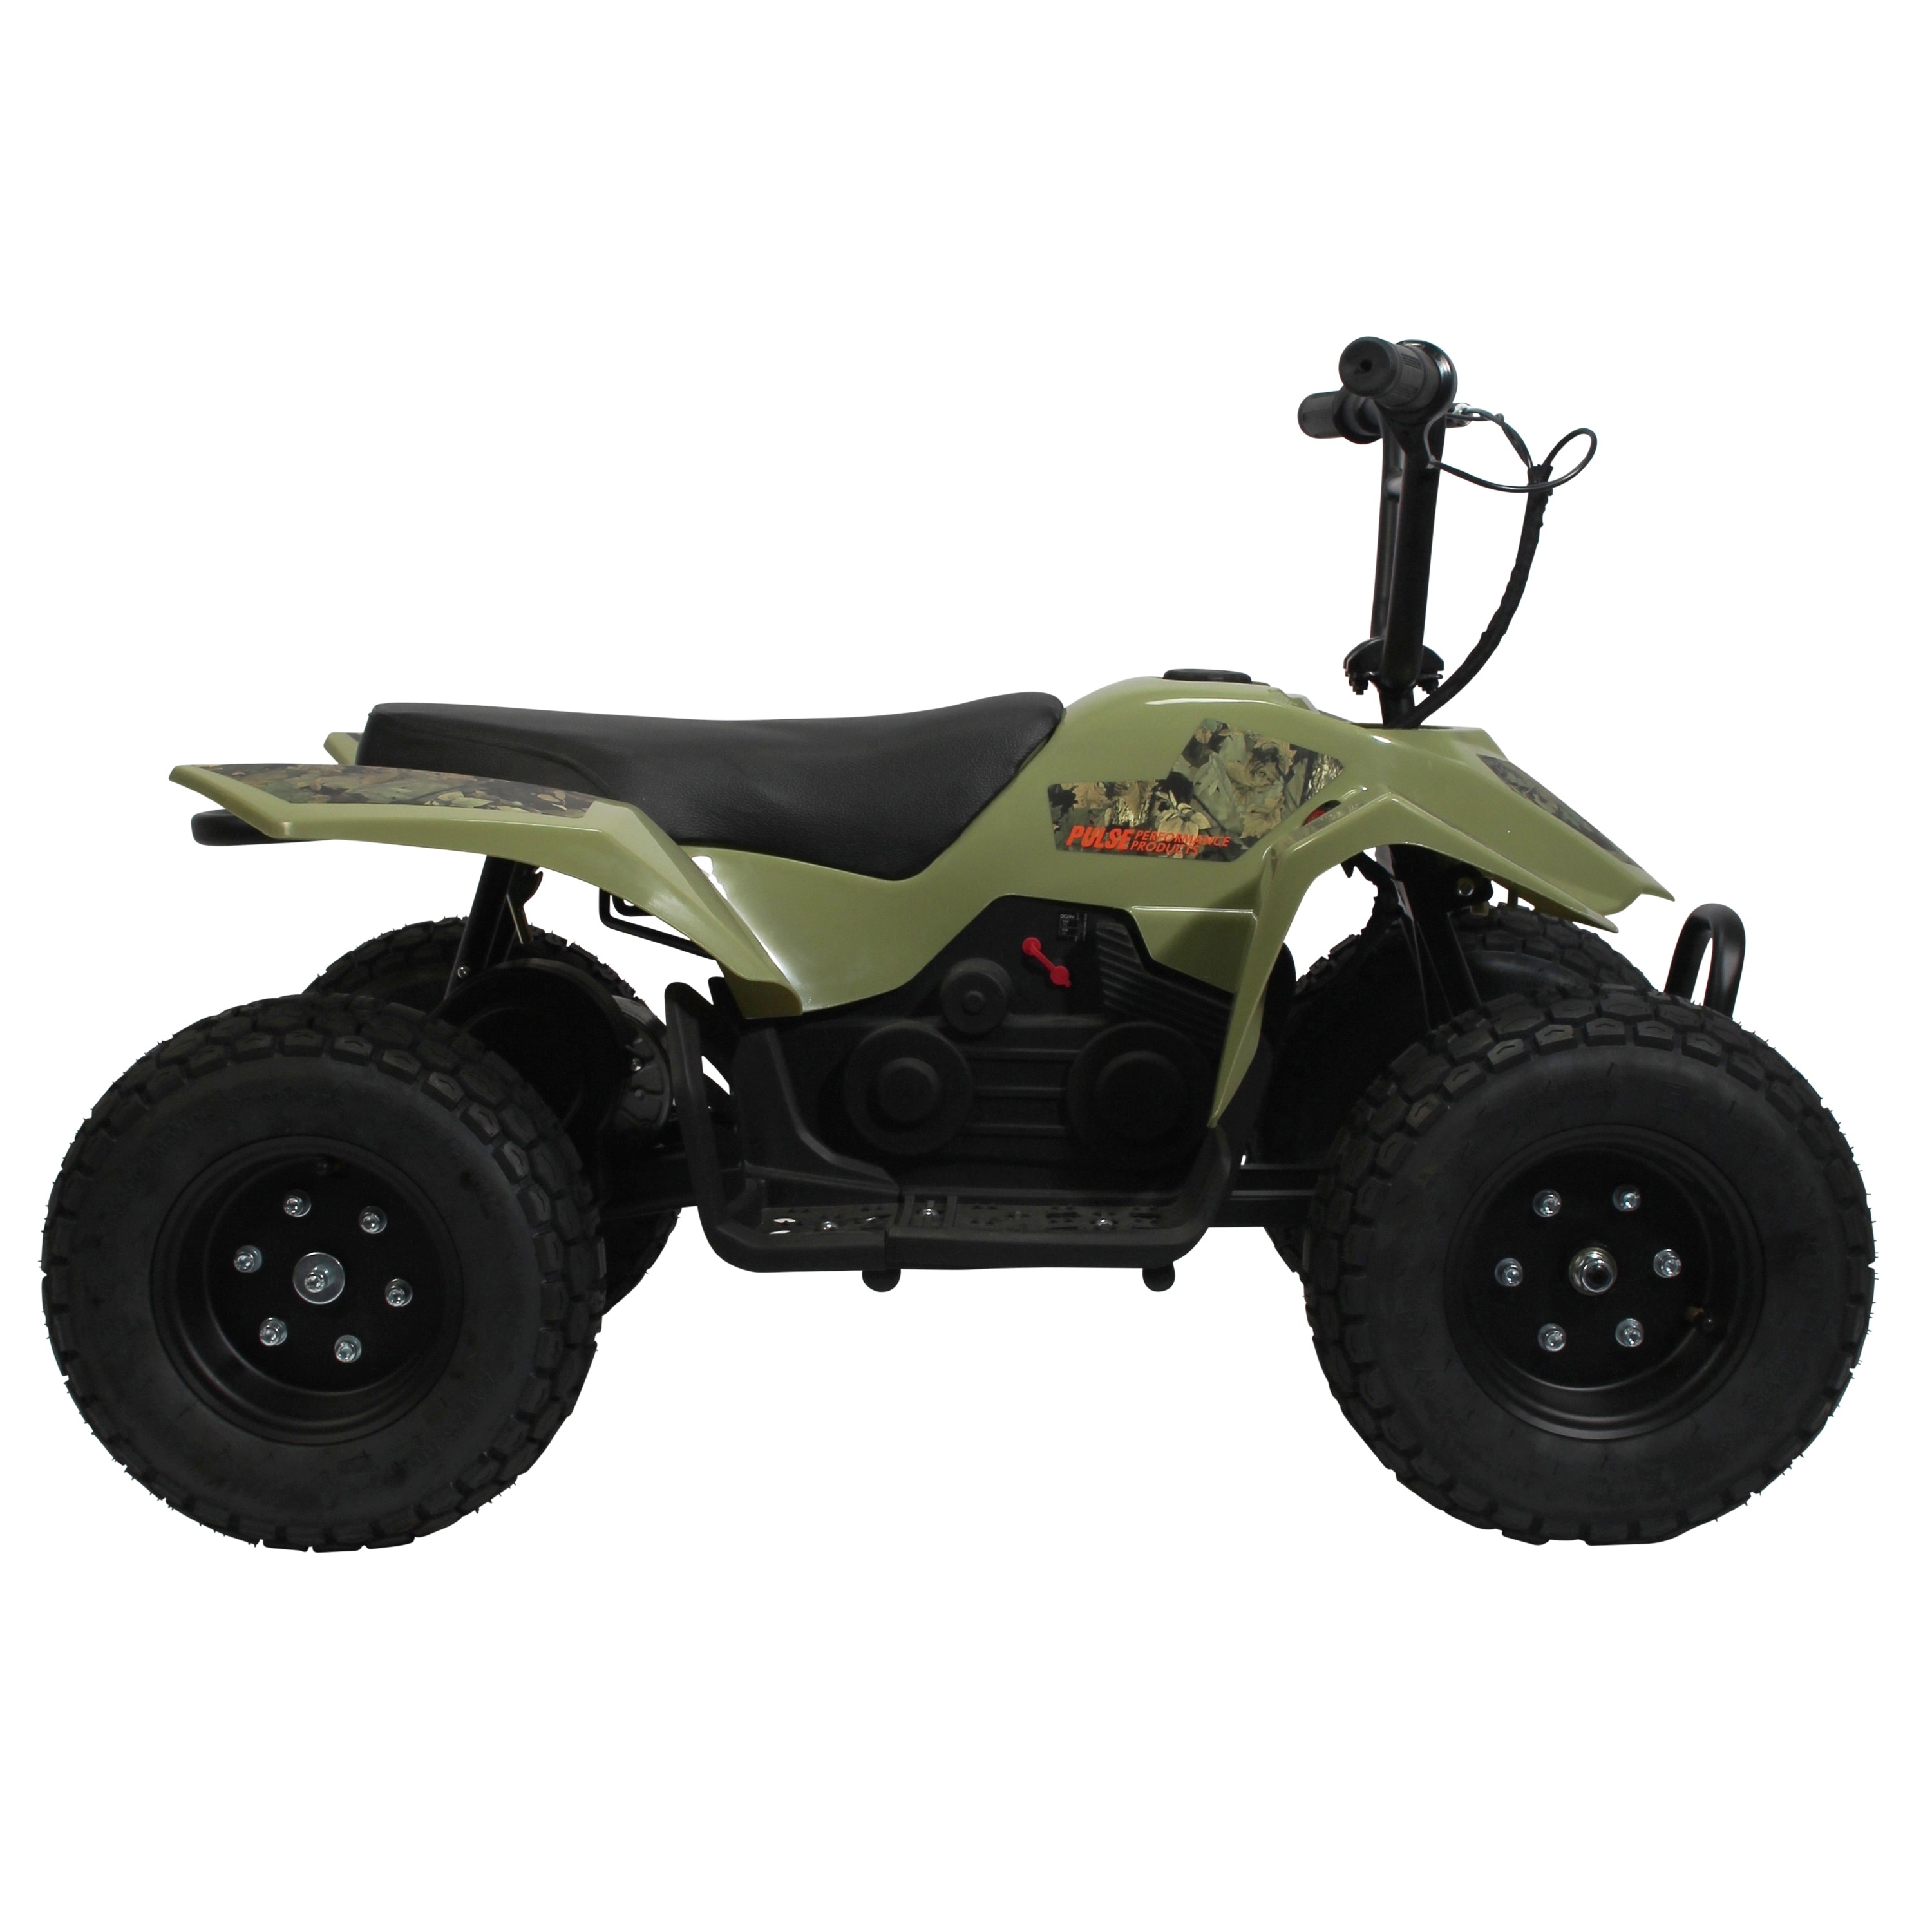 pulse performance products atv quad battery powered riding toy